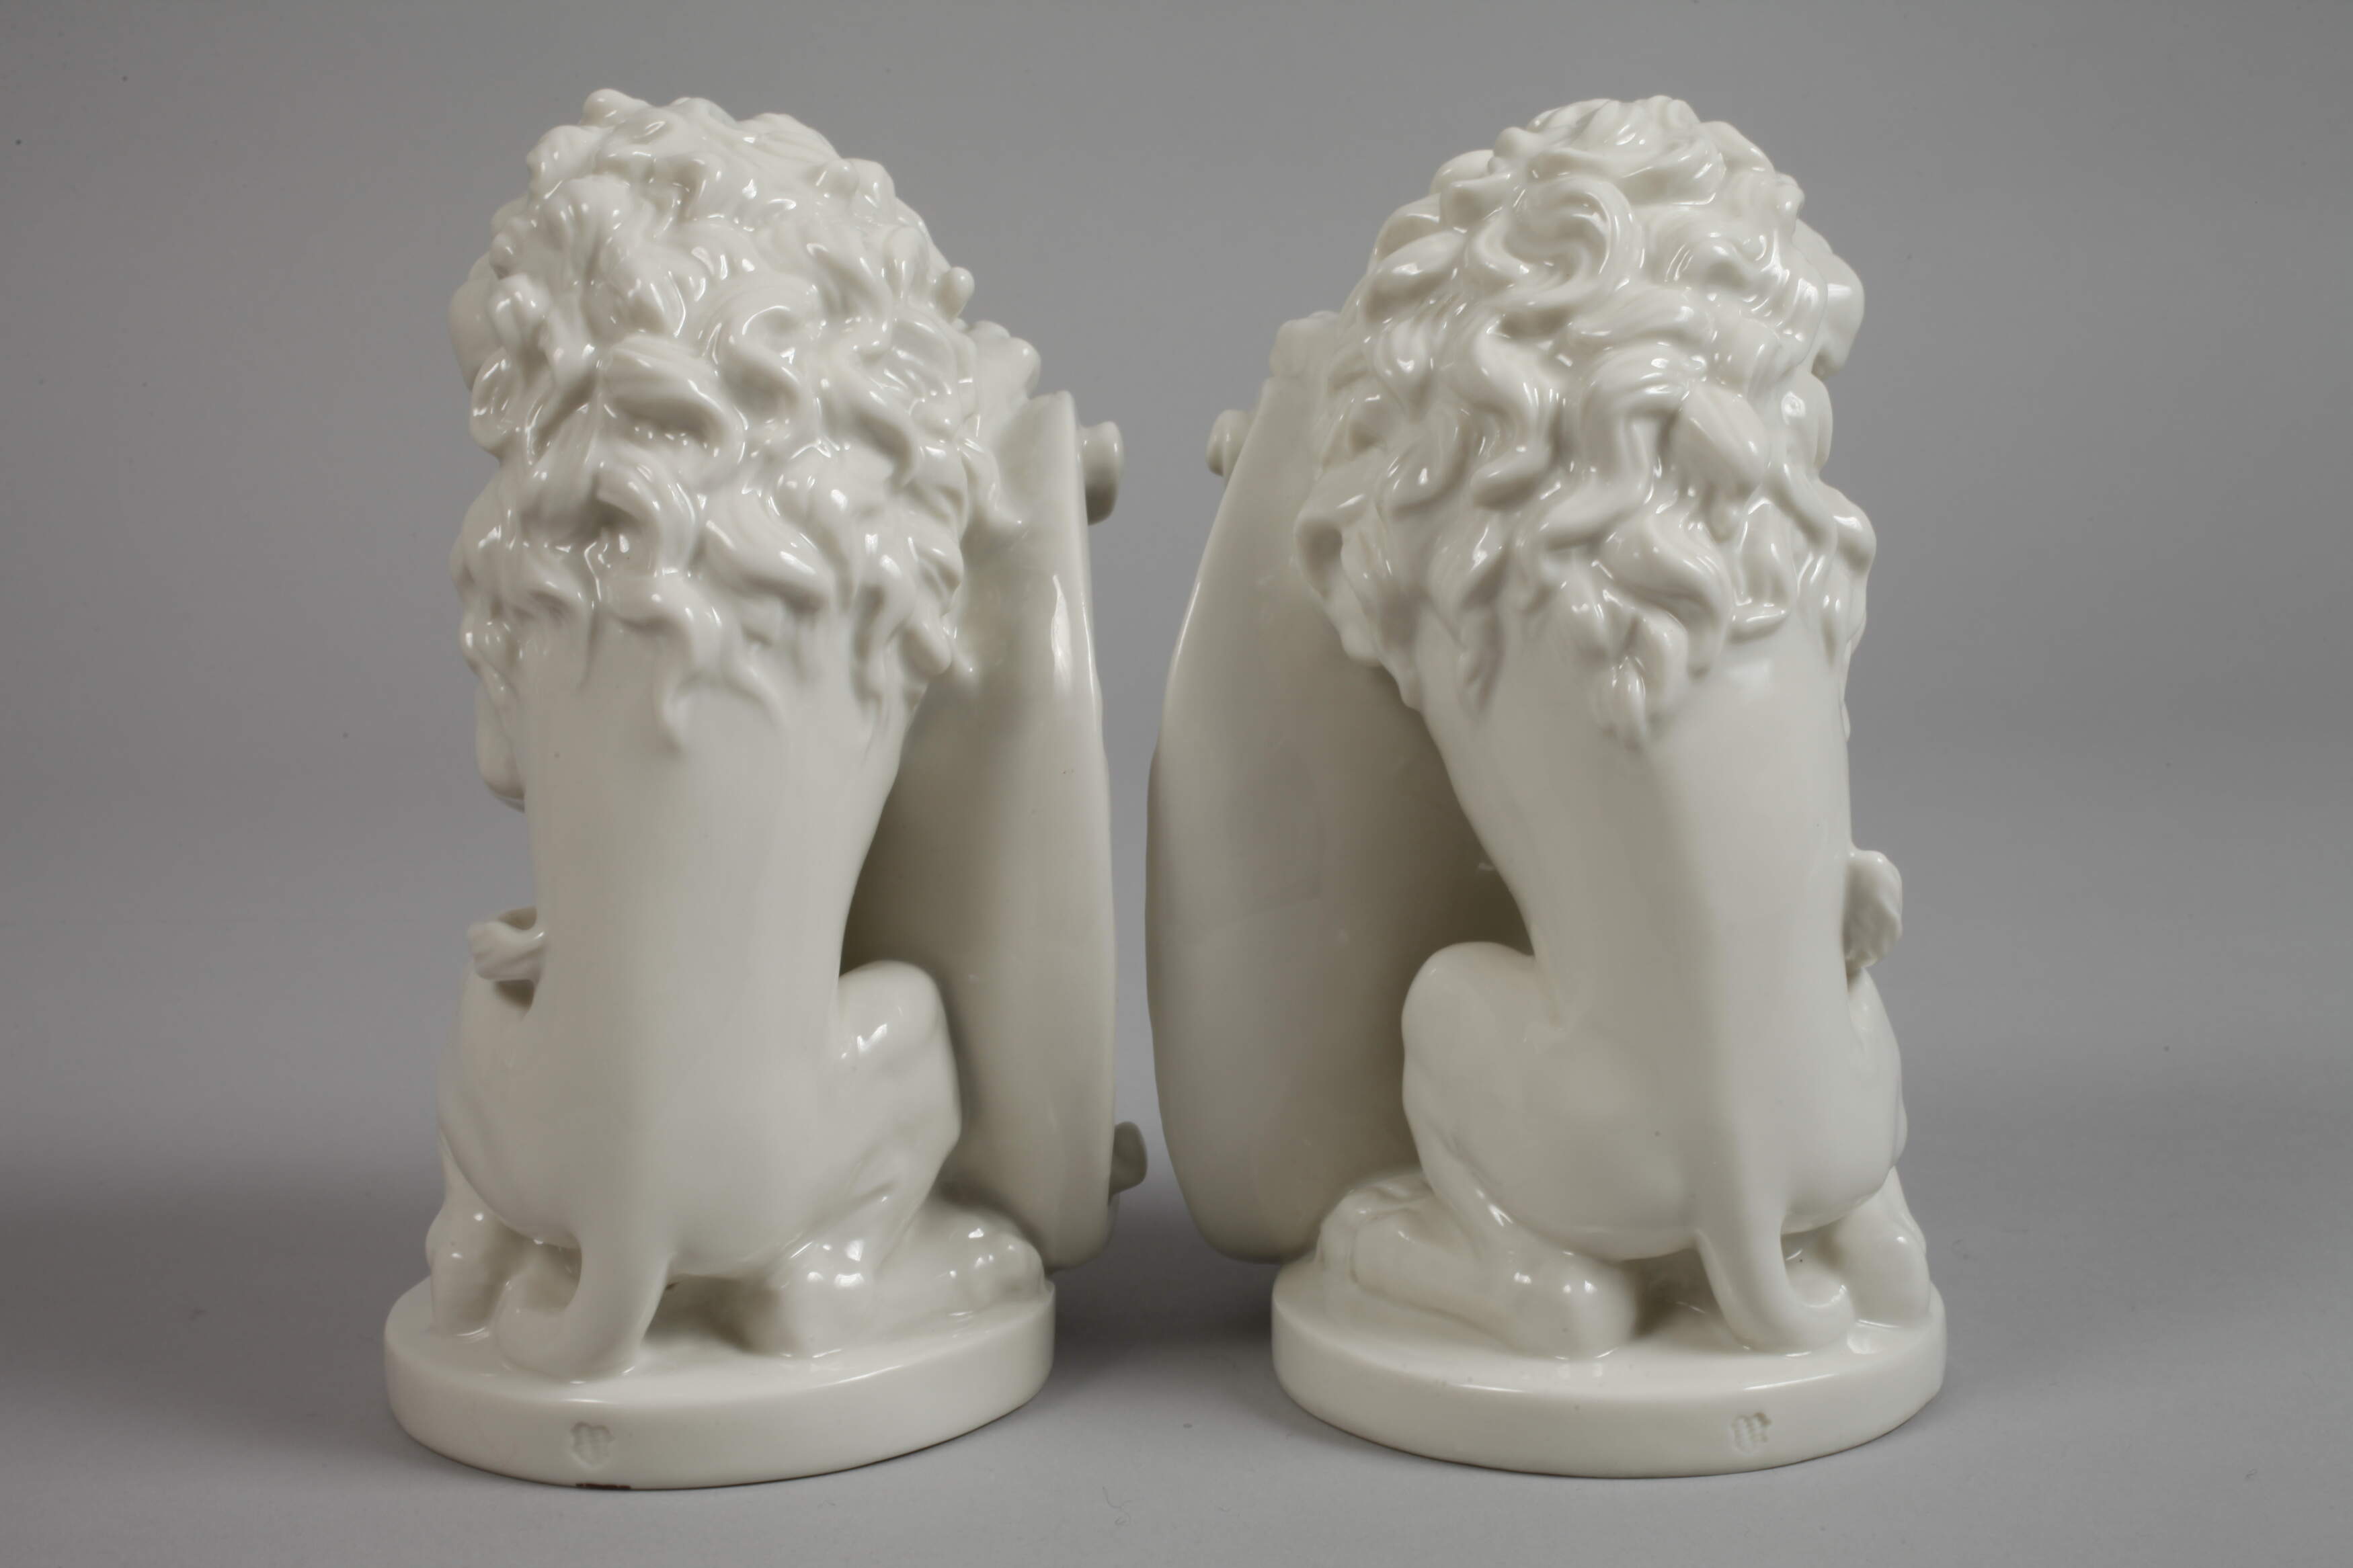 Nymphenburg pair "Lion with (Bavarian) coat of arms" - Image 4 of 5